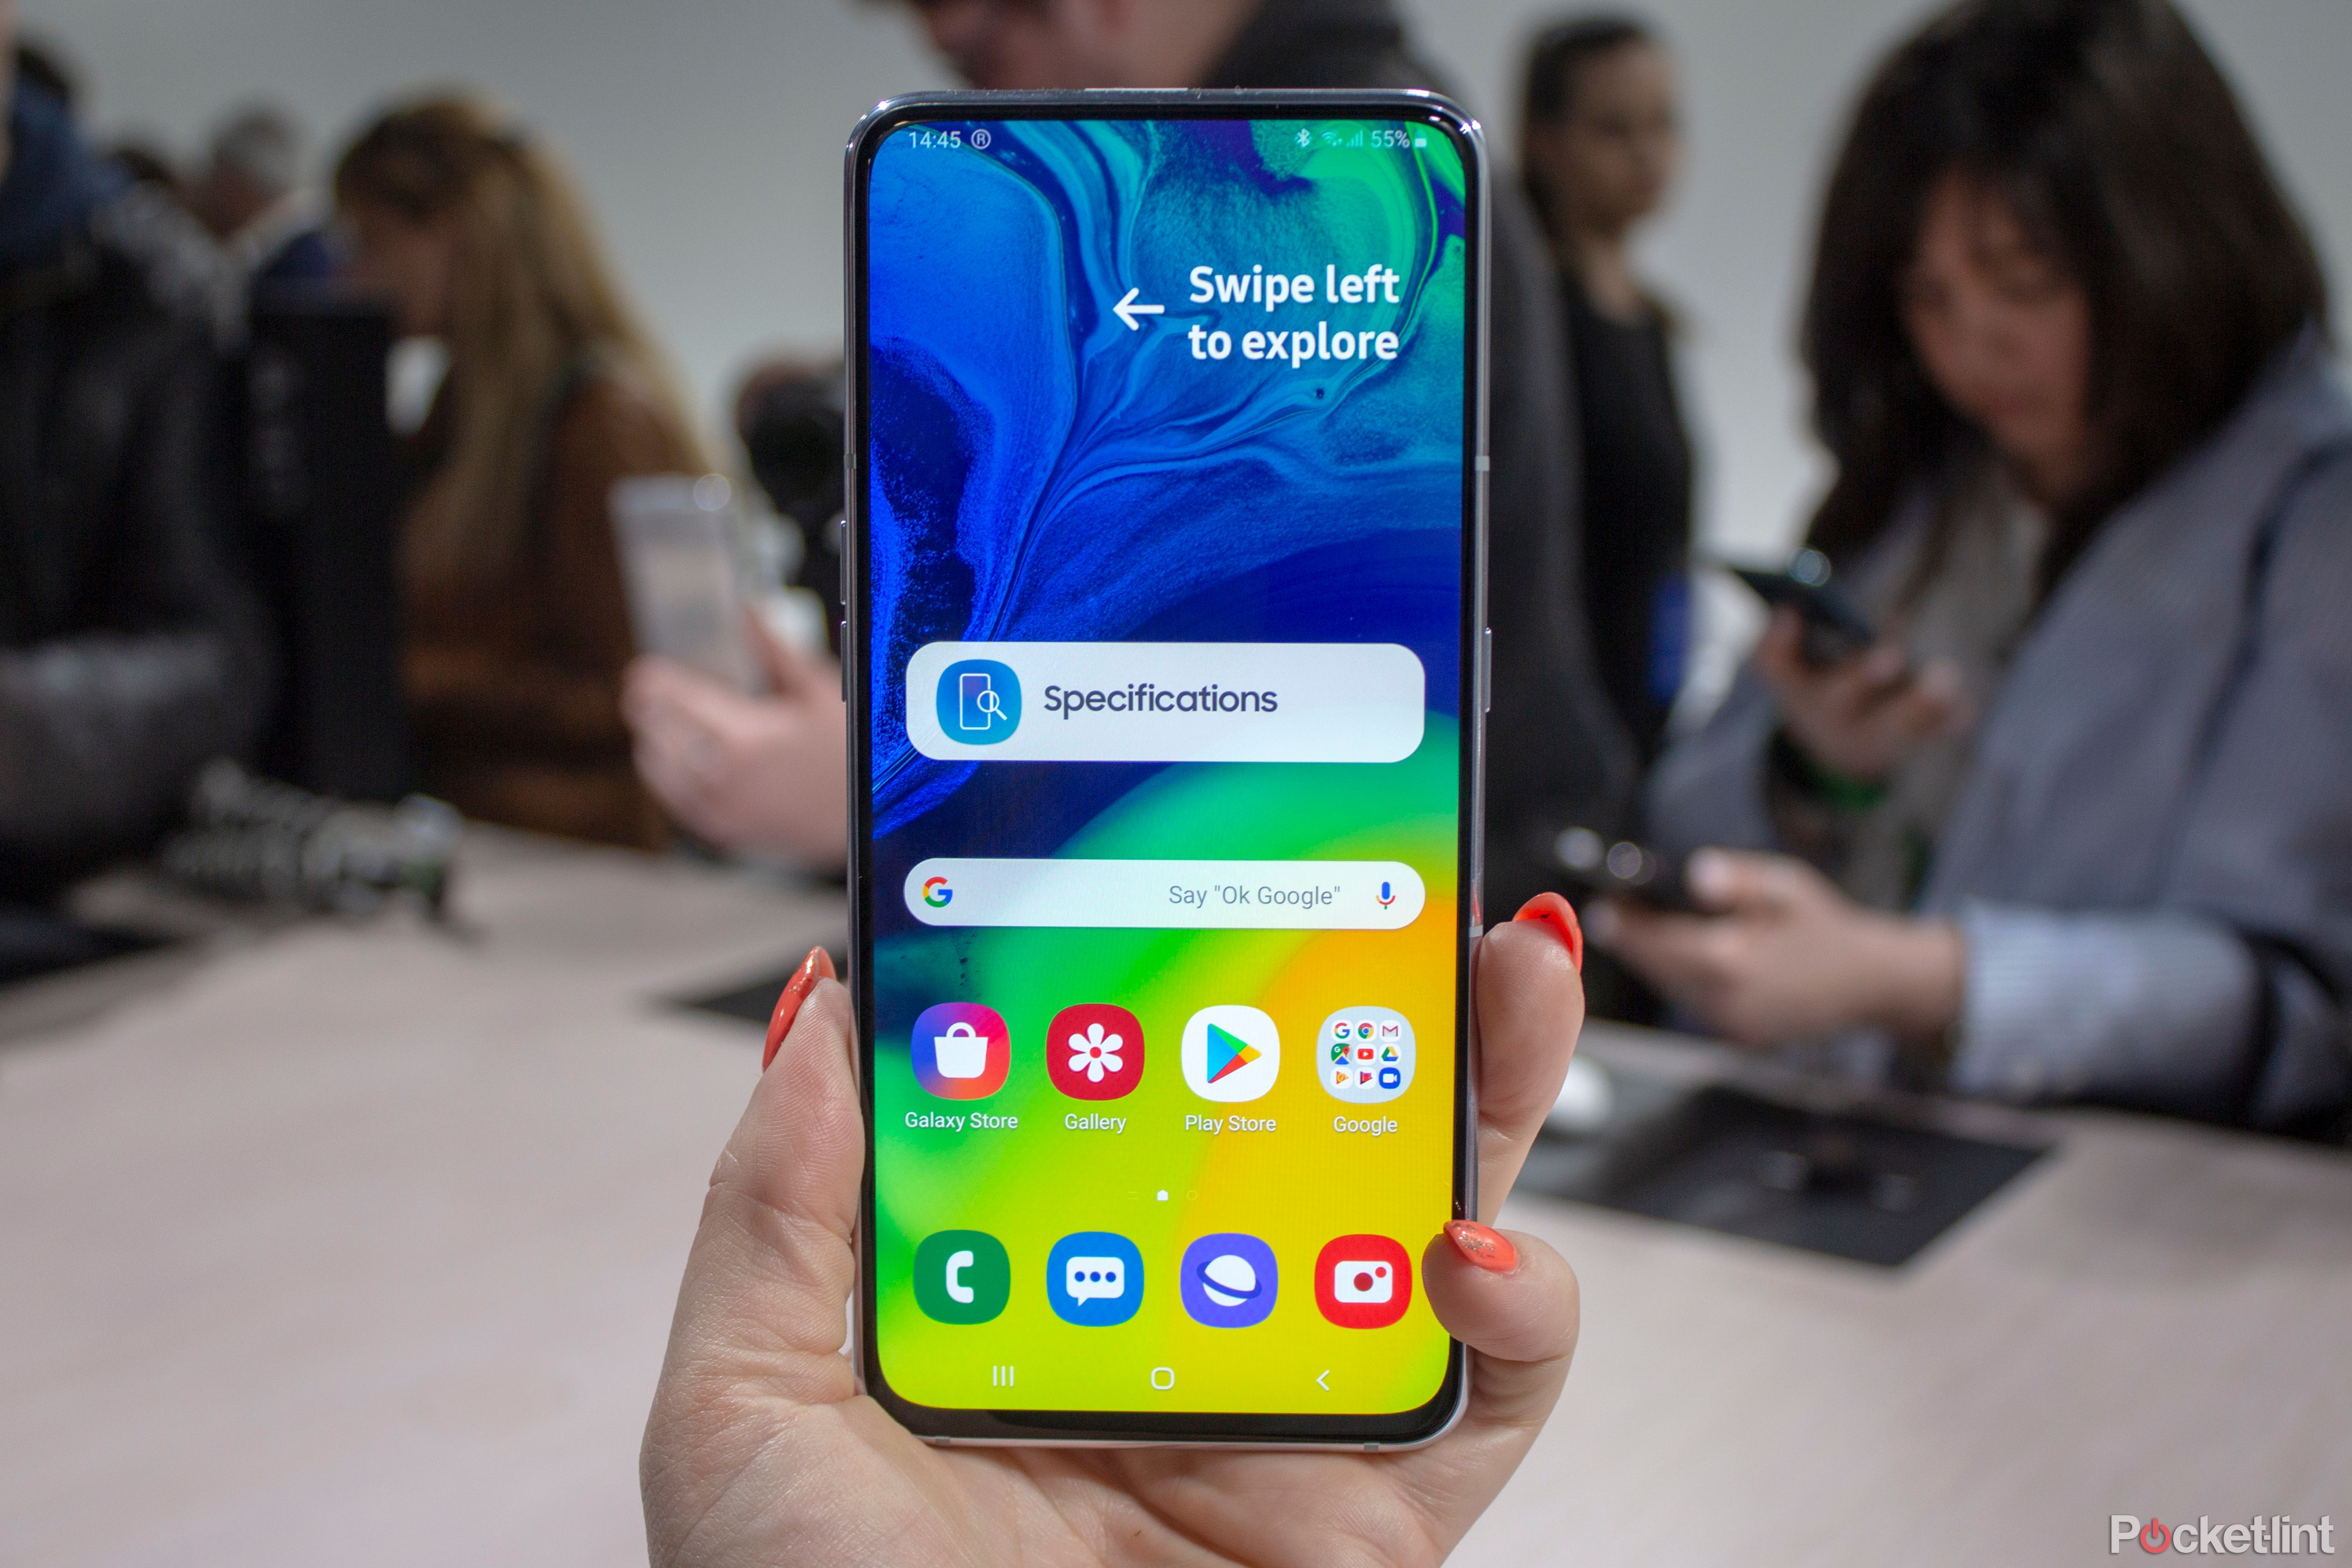 Samsung Galaxy A80 initial review product images image 1